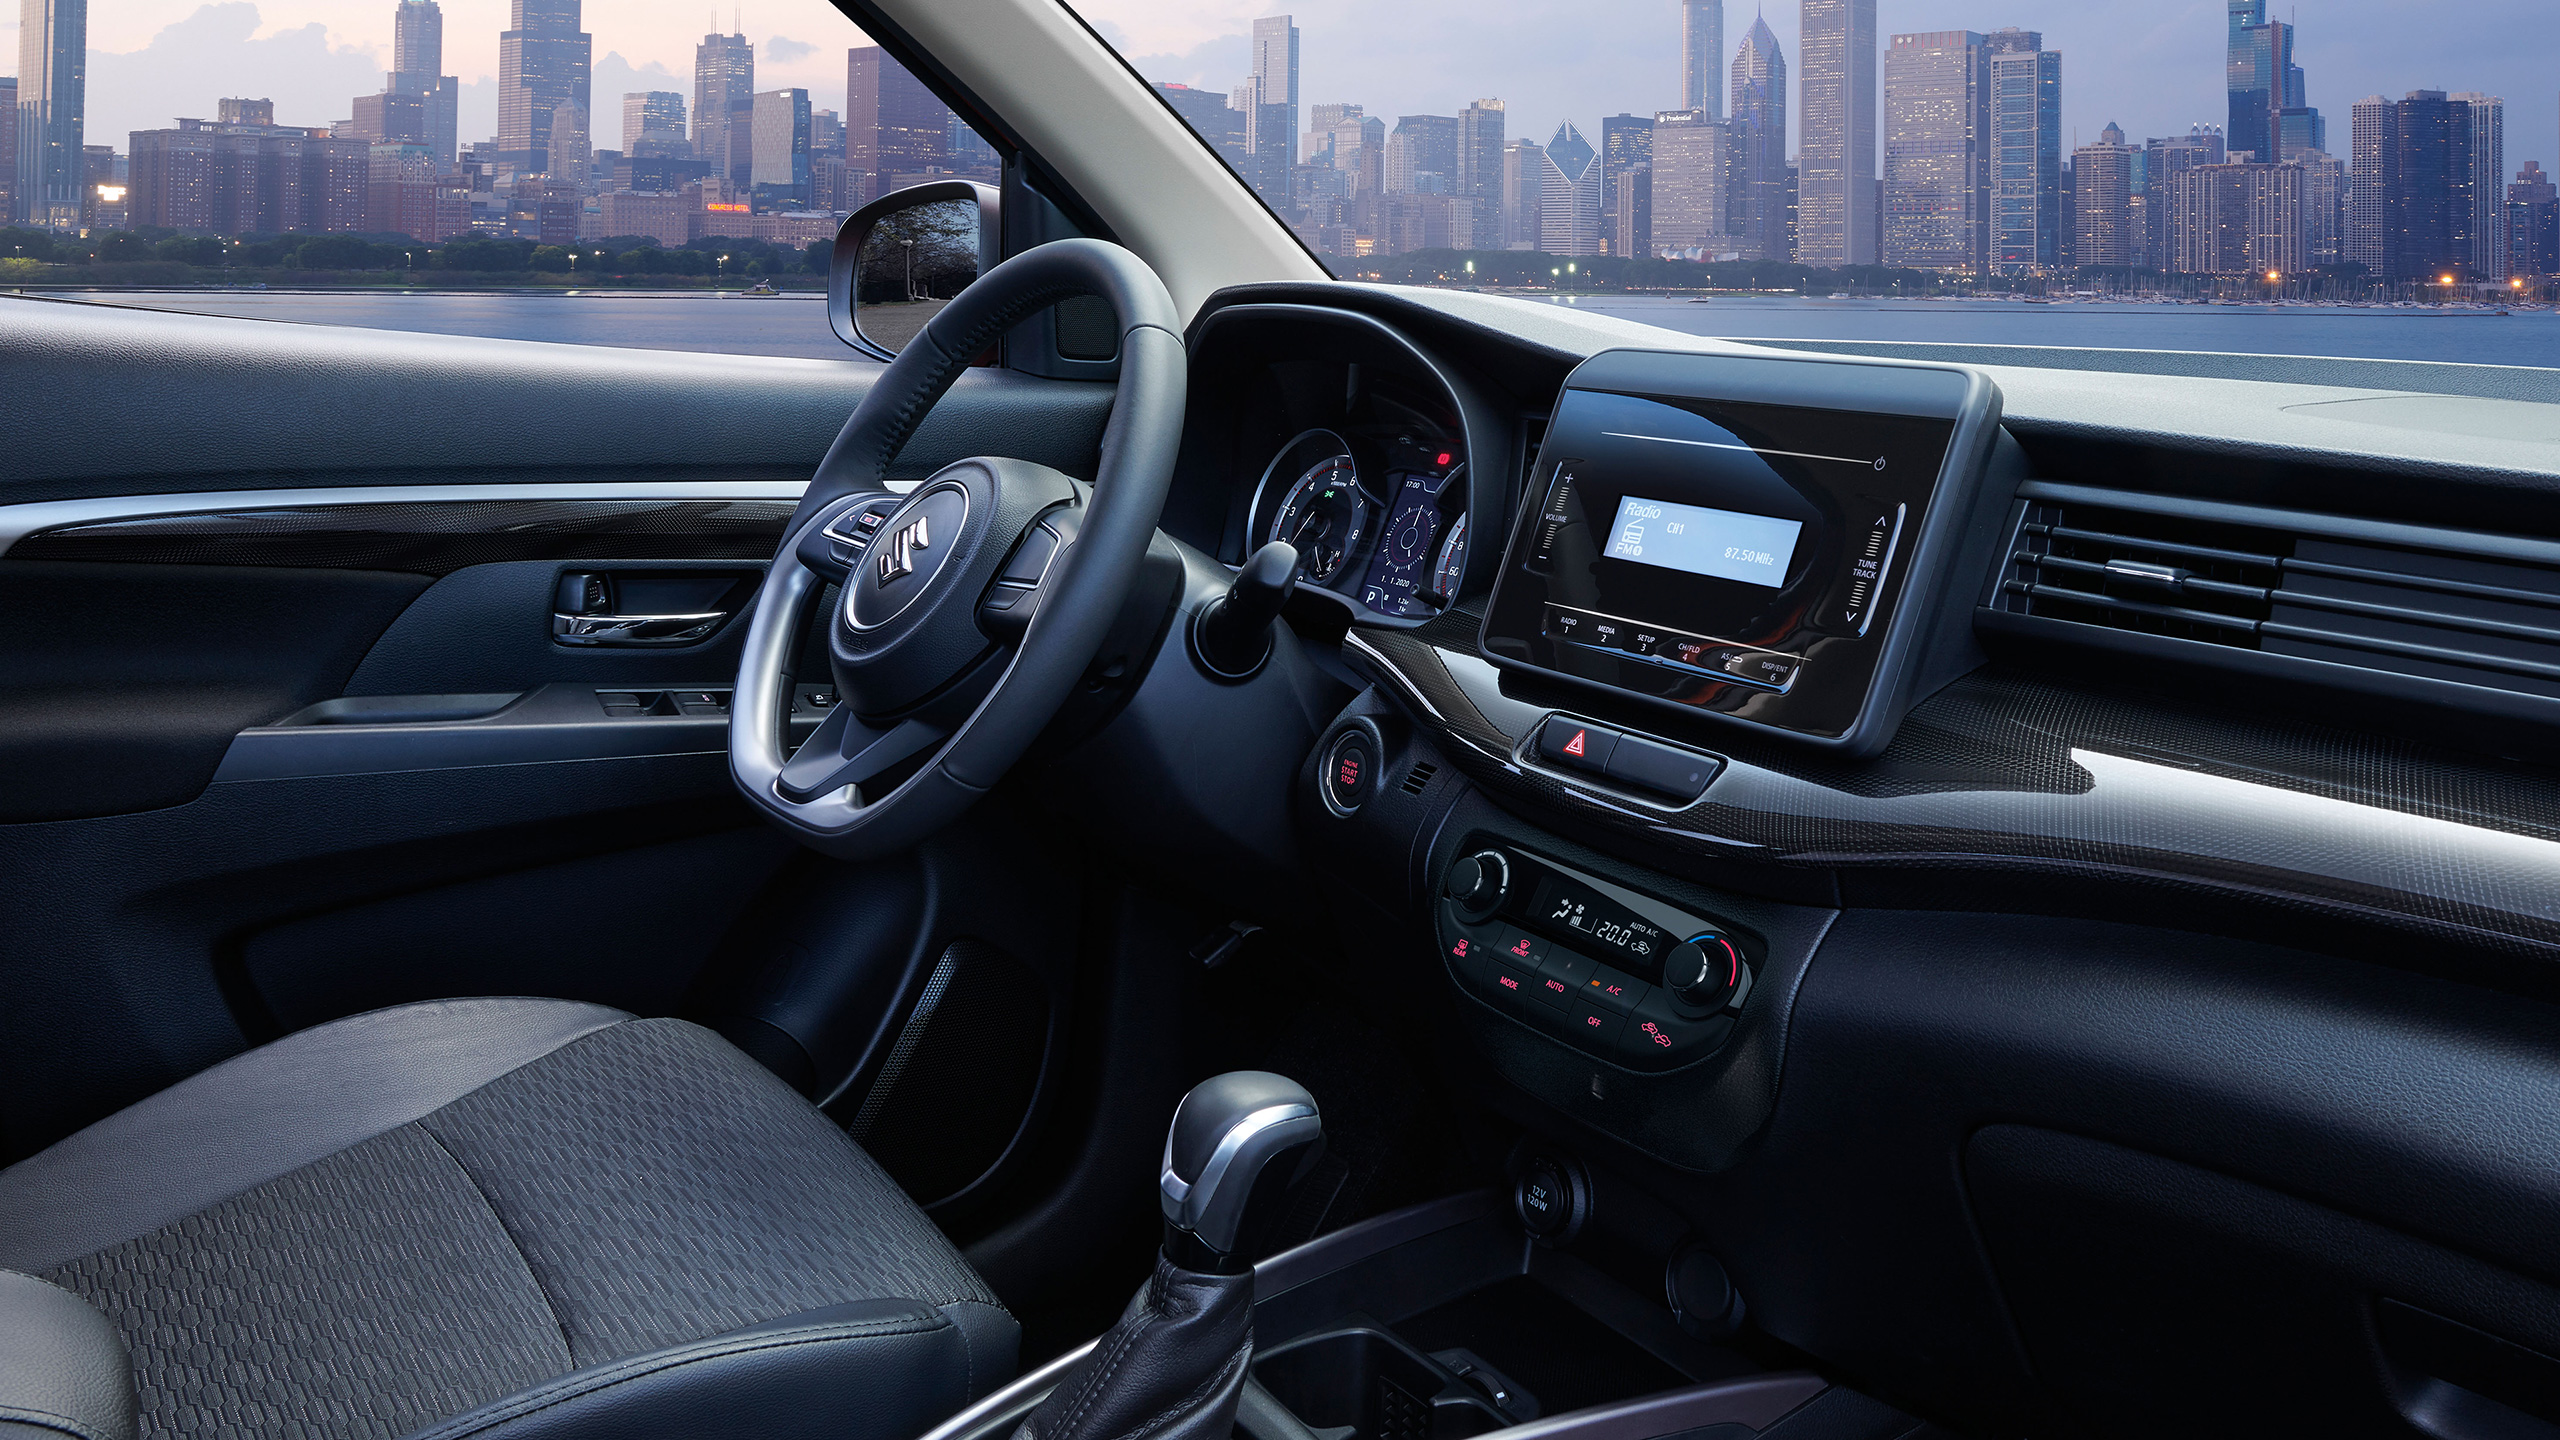 XL7-dashboard-with-cityscape-view-over-the-river-outside